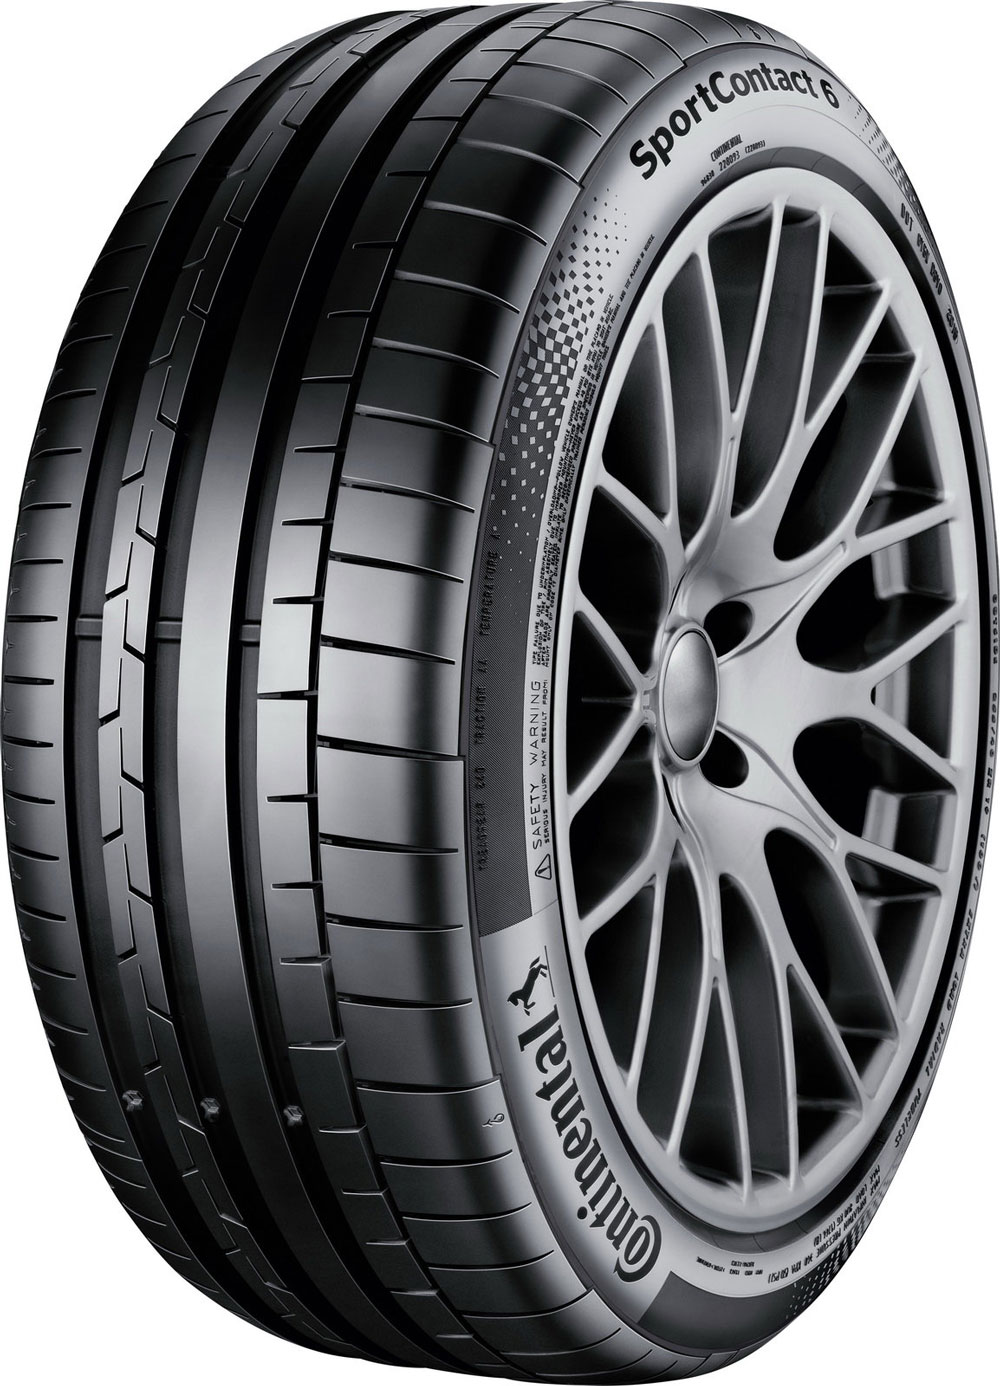 Автомобилни гуми CONTINENTAL SPORT CONTACT 6 MERCEDES FP 315/40 R21 111Y